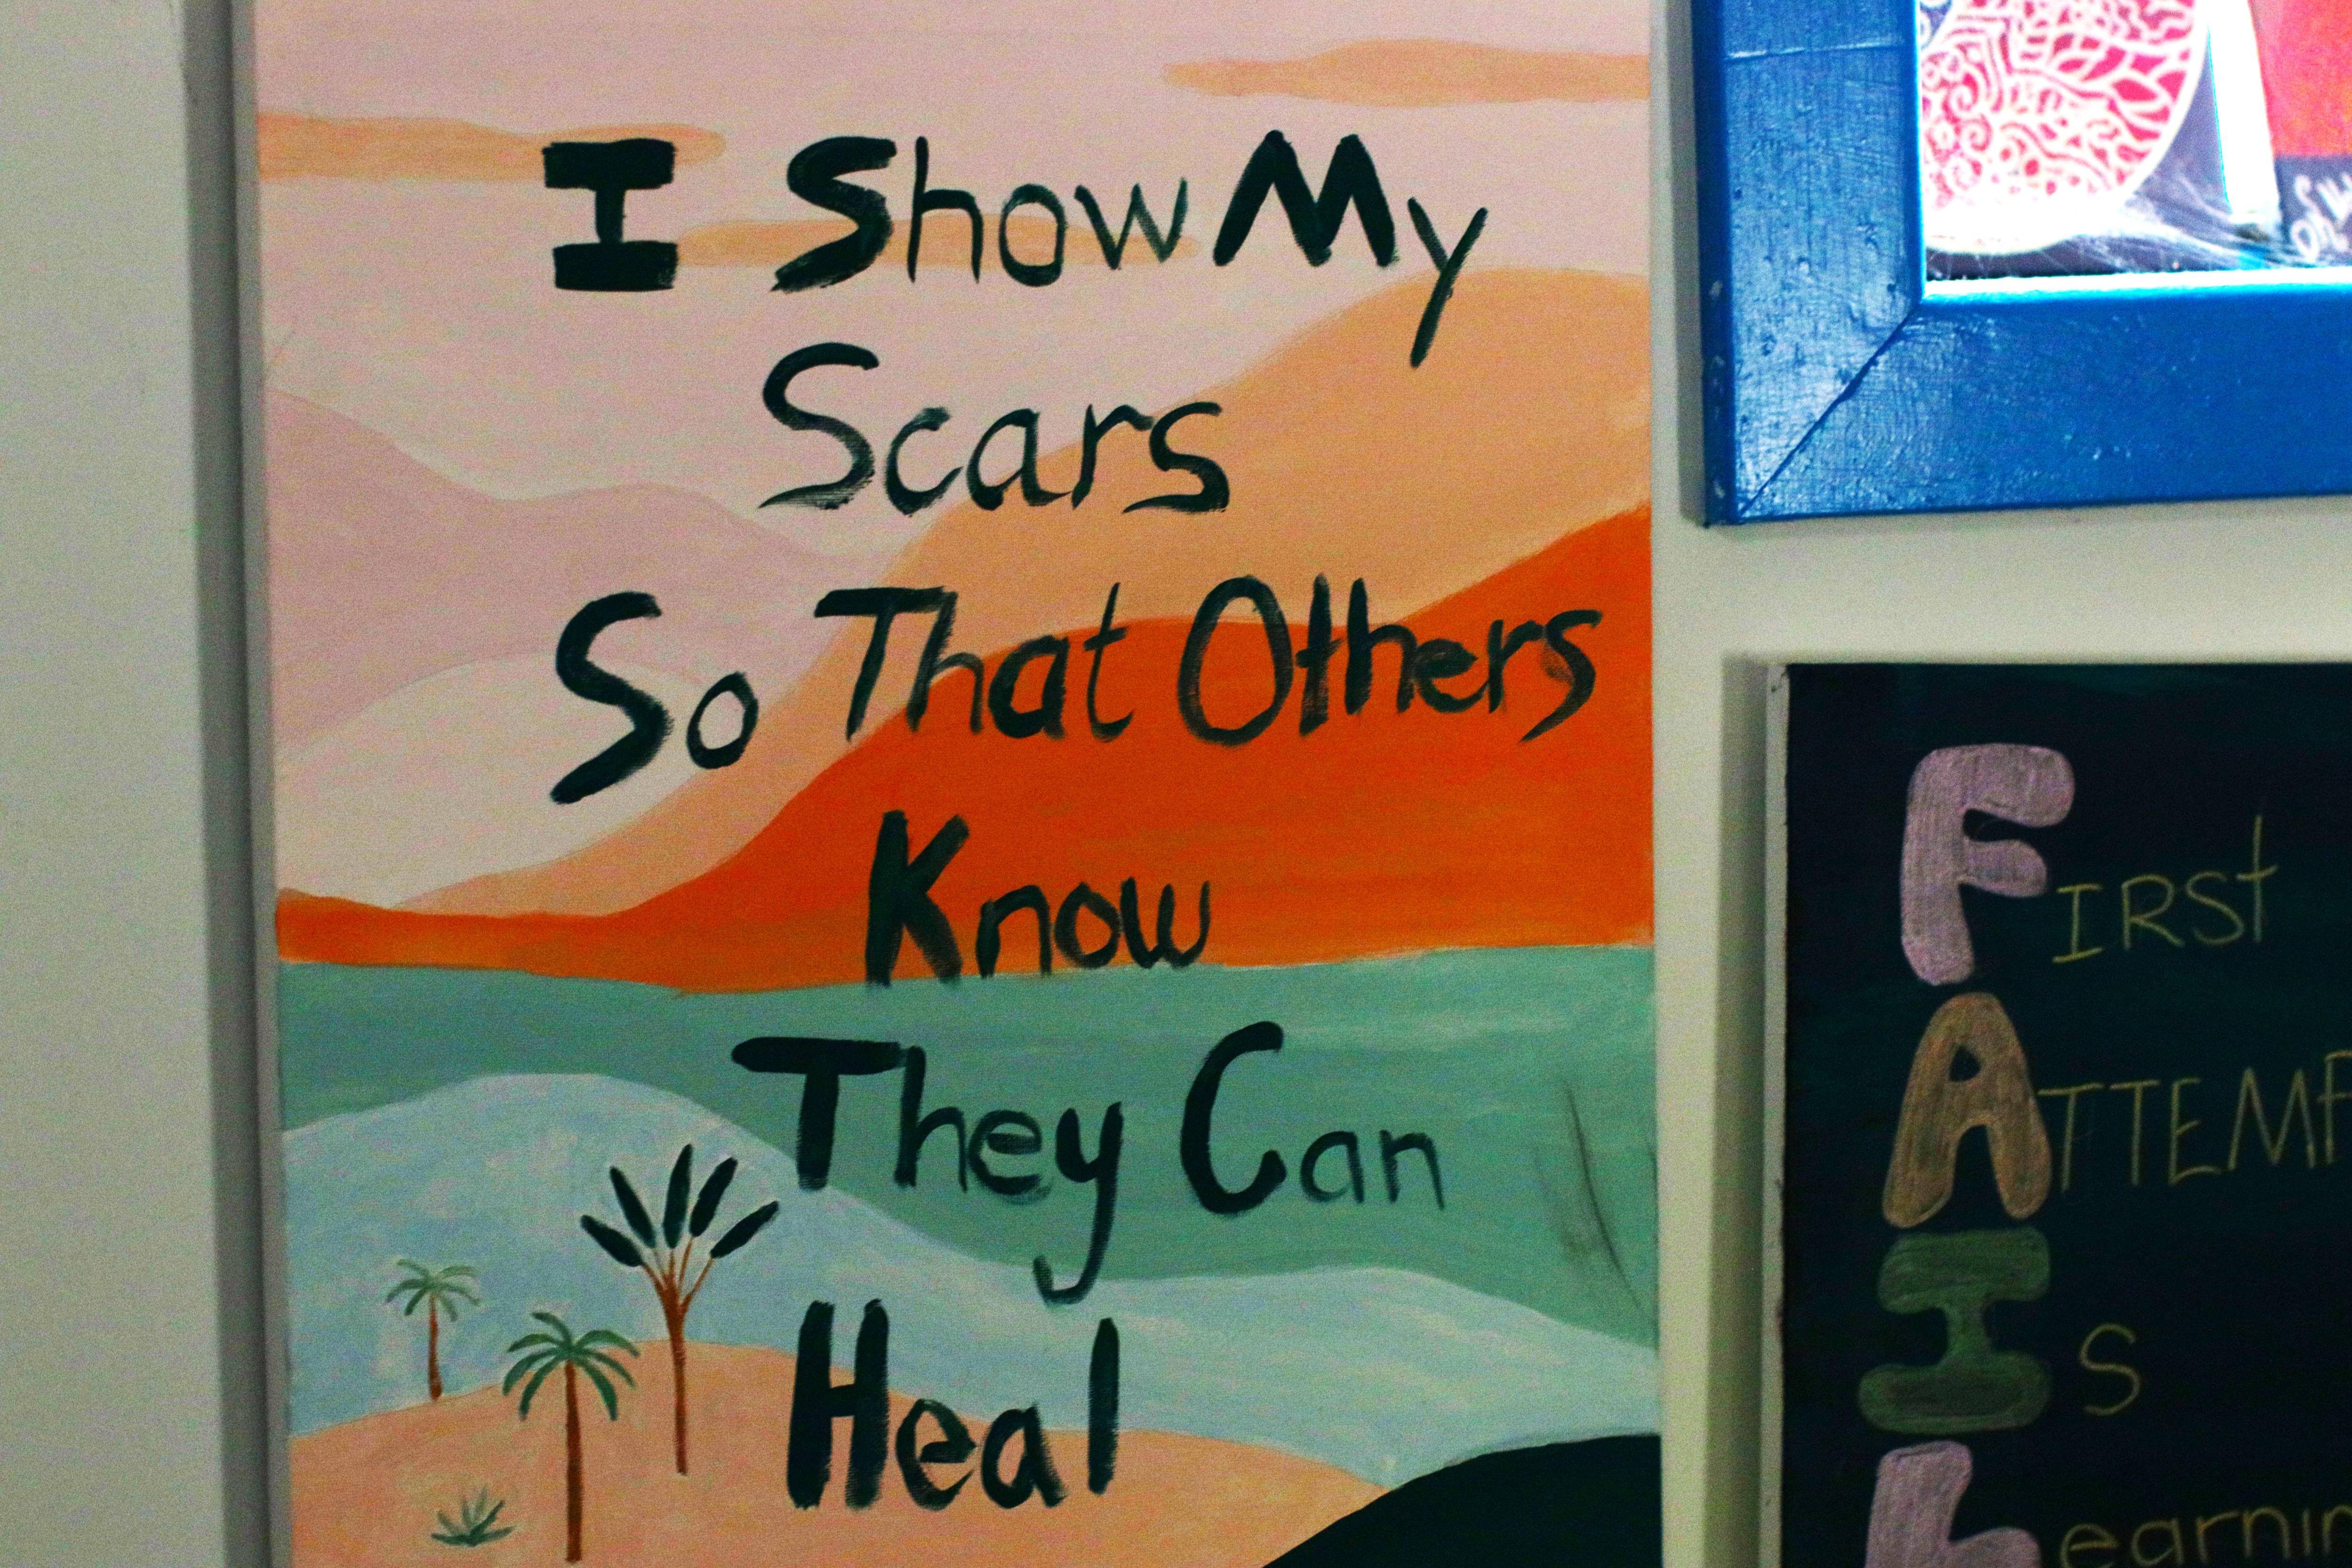 Colourful meme painted about showing scars so others can heal